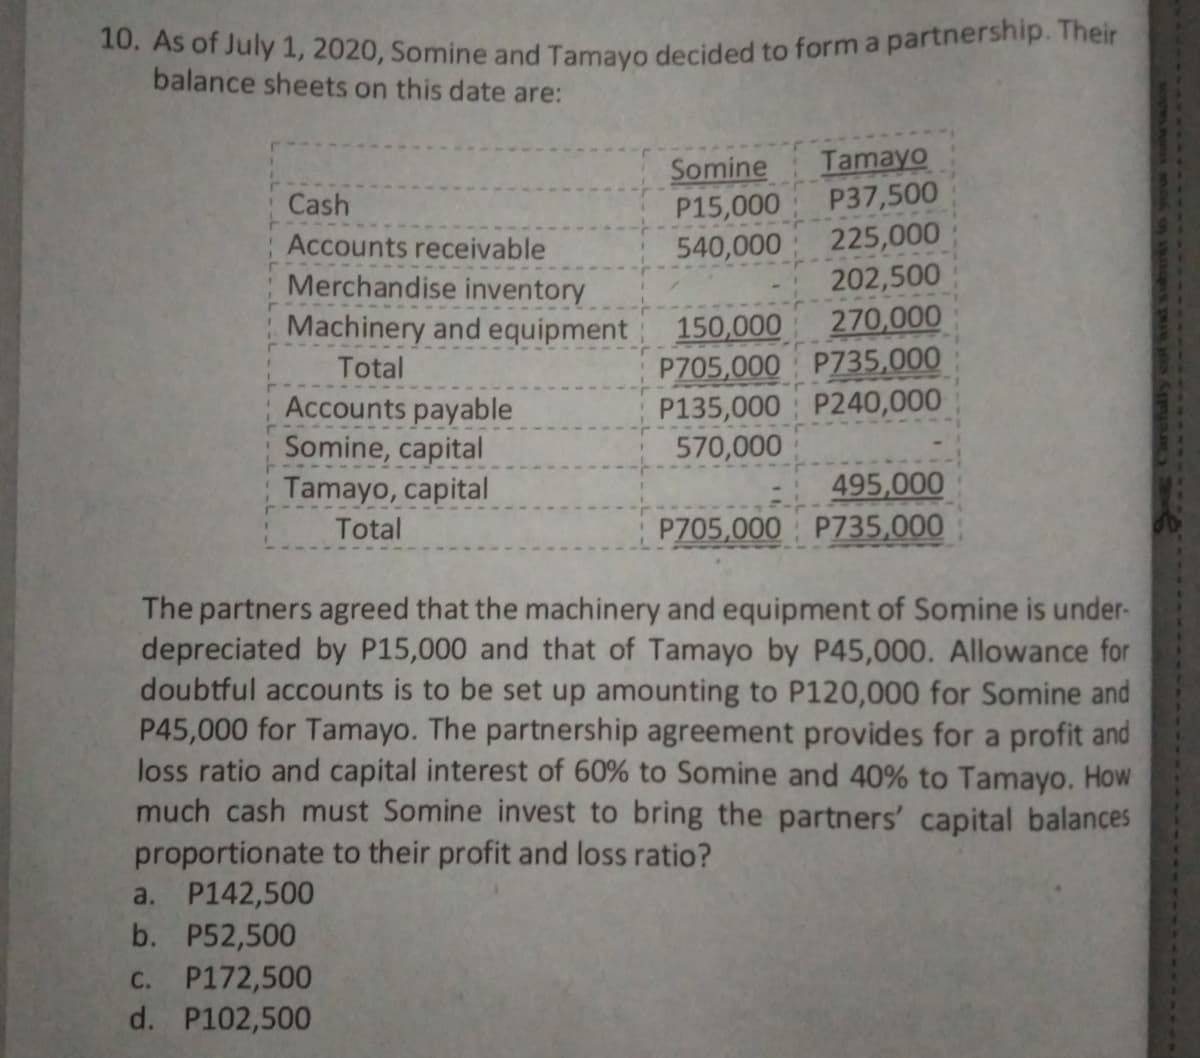 10. As of July 1, 2020, Somine and Tamayo decided to form a partnership. Their
balance sheets on this date are:
Tamayo
P37,500
225,000
202,500
270,000
P705,000 P735,000
P135,000 P240,000
Somine
P15,000
540,000
Cash
Accounts receivable
Merchandise inventory
Machinery and equipment 150,000
Total
Accounts payable
Somine, capital
Tamayo, capital
570,000
495,000
P705,000 P735,000
Total
The partners agreed that the machinery and equipment of Somine is under-
depreciated by P15,000 and that of Tamayo by P45,000. Allowance for
doubtful accounts is to be set up amounting to P120,000 for Somine and
P45,000 for Tamayo. The partnership agreement provides for a profit and
loss ratio and capital interest of 60% to Somine and 40% to Tamayo. How
much cash must Somine invest to bring the partners' capital balances
proportionate to their profit and loss ratio?
a. P142,500
b. P52,500
C. P172,500
d. P102,500
